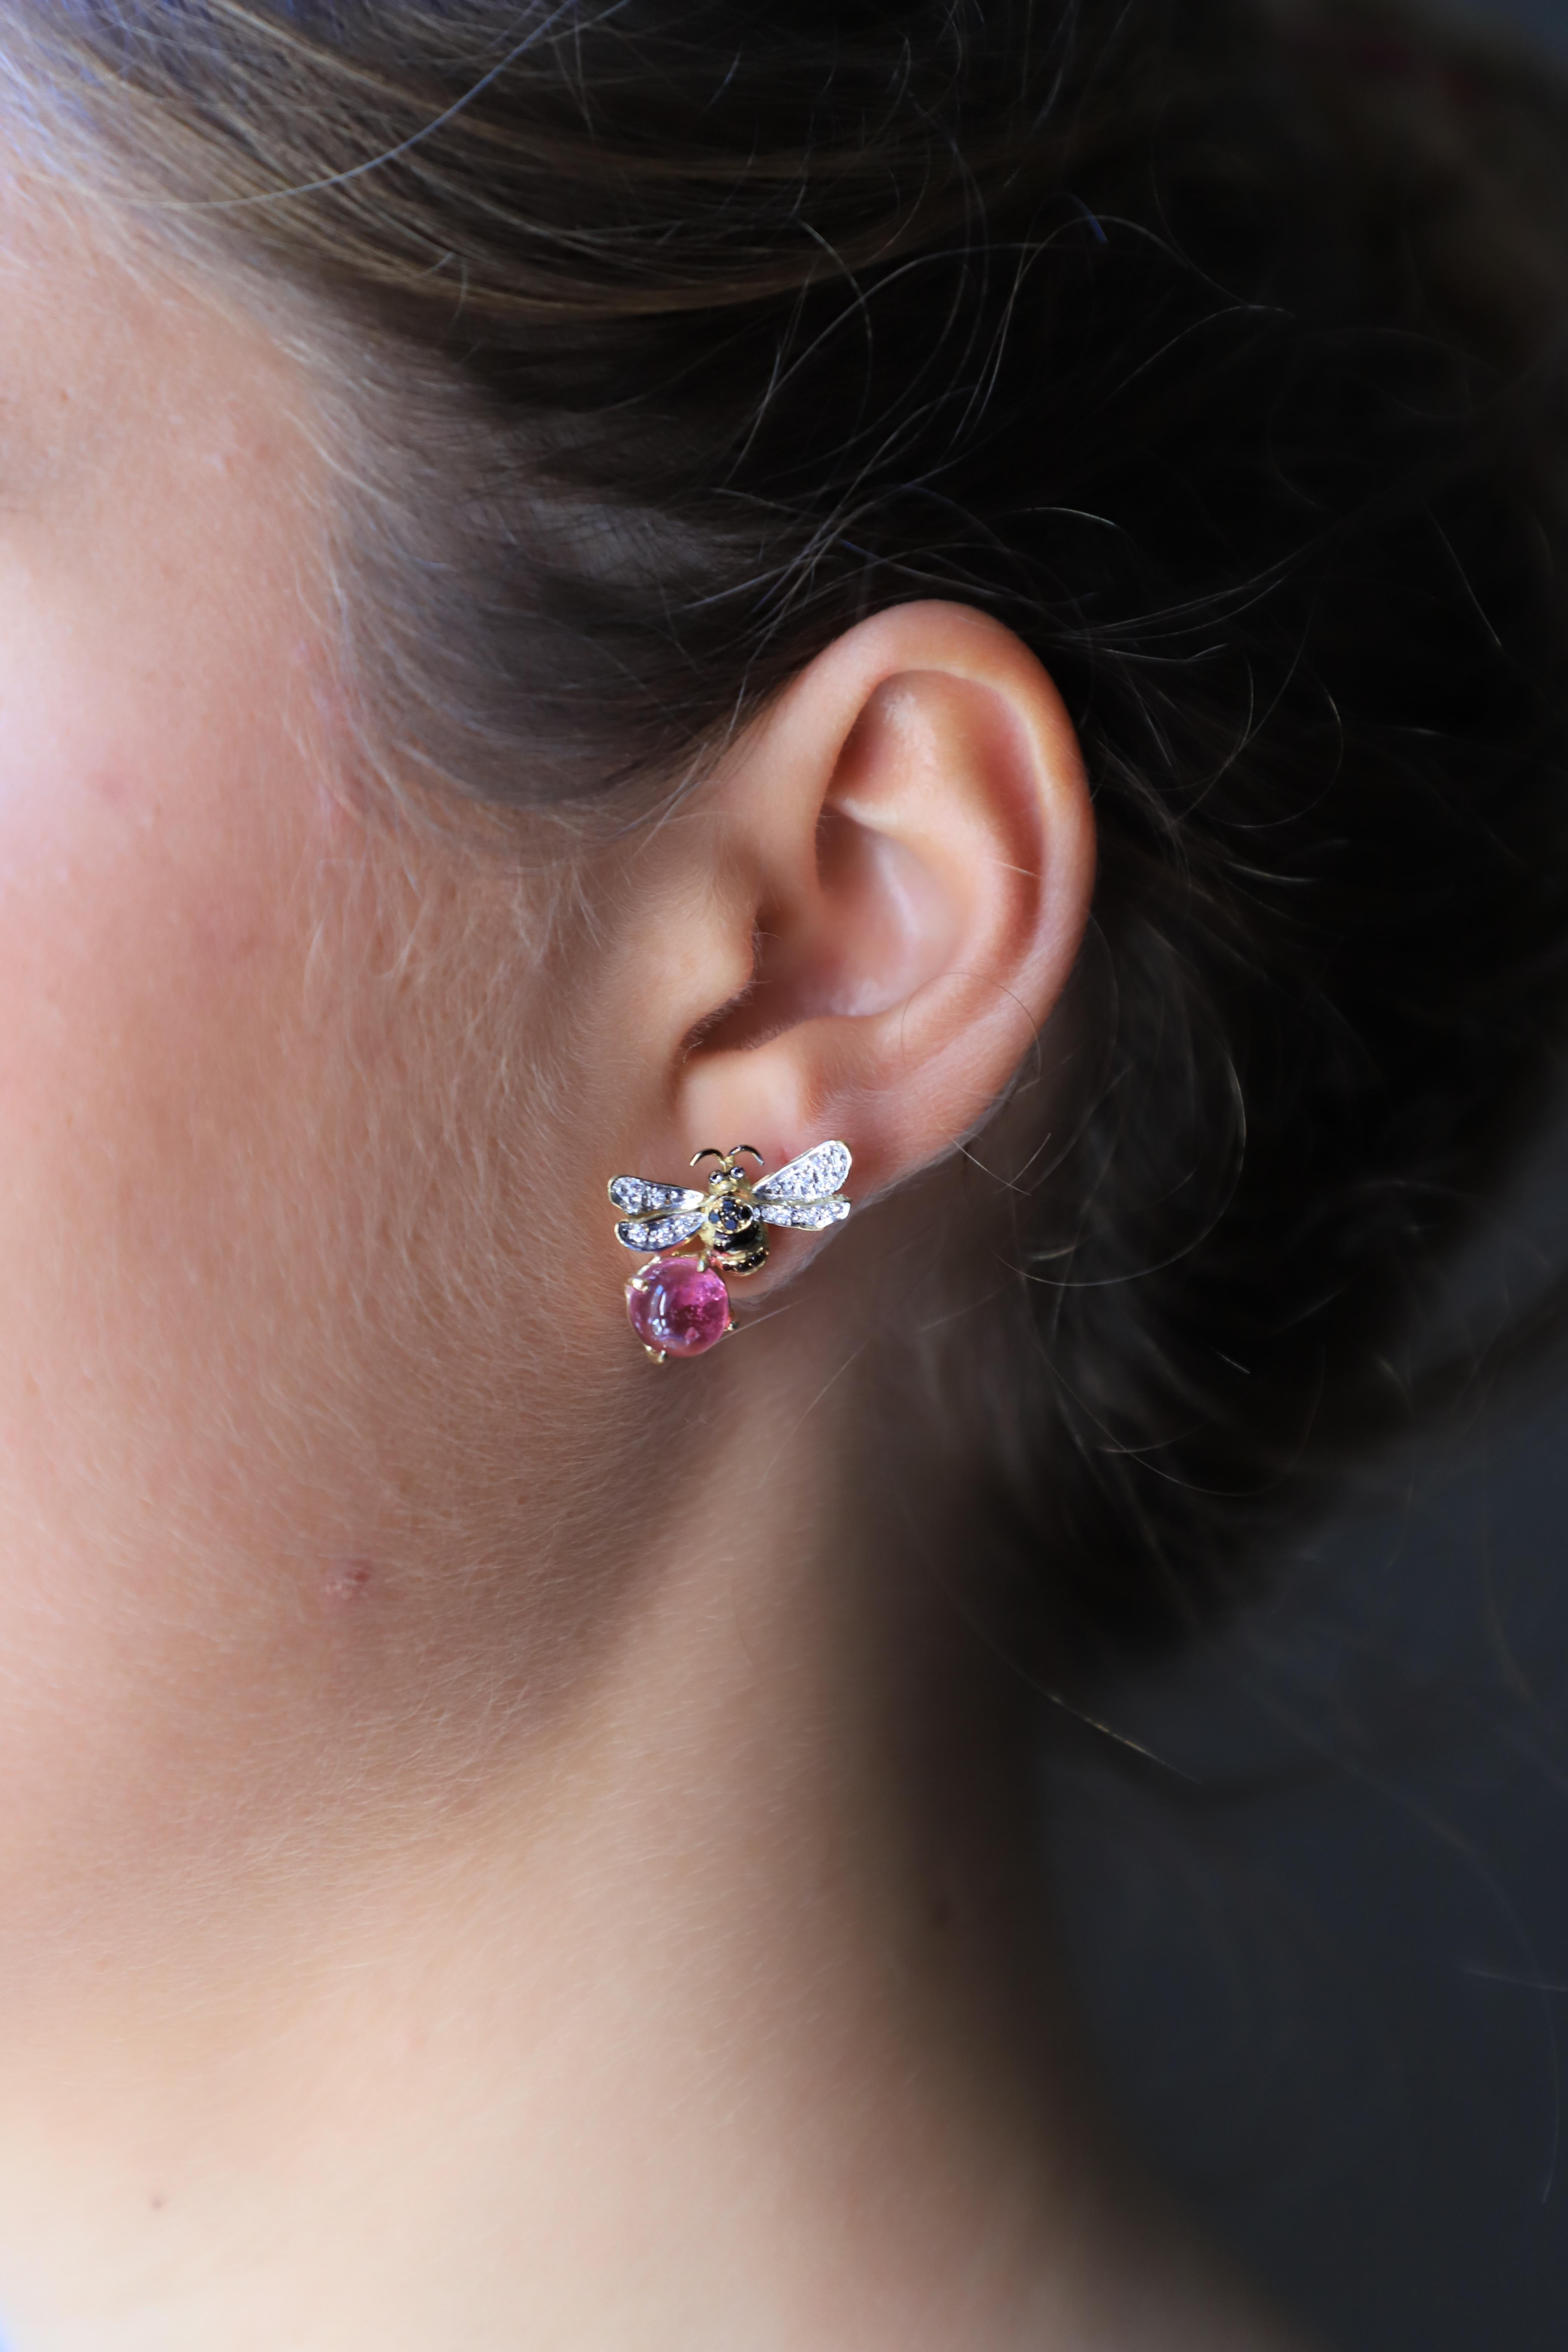 Rossella Ugolini  Design Collection 18 Karat Yellow Gold 5.5 Carat Pink Tourmaline 0.16 Carat White Diamond 0.18 Carat Black Diamonds Bees Handcrafted Stud Earrings.
This collection was born to celebrate a precious creature, essential for our